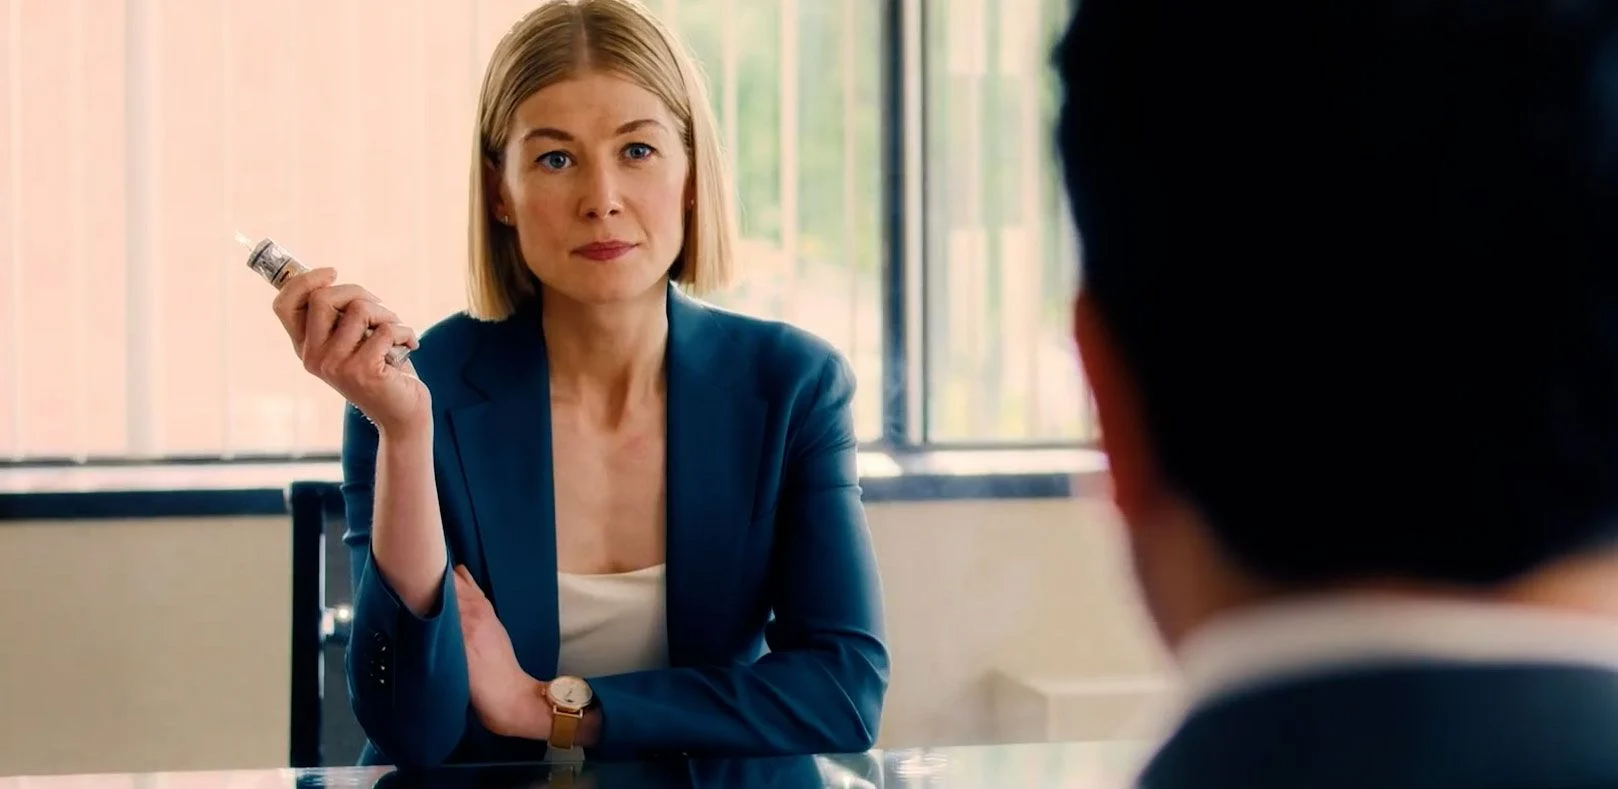 A still from the film "I Care A Lot", where a woman at a desk holds a vape.